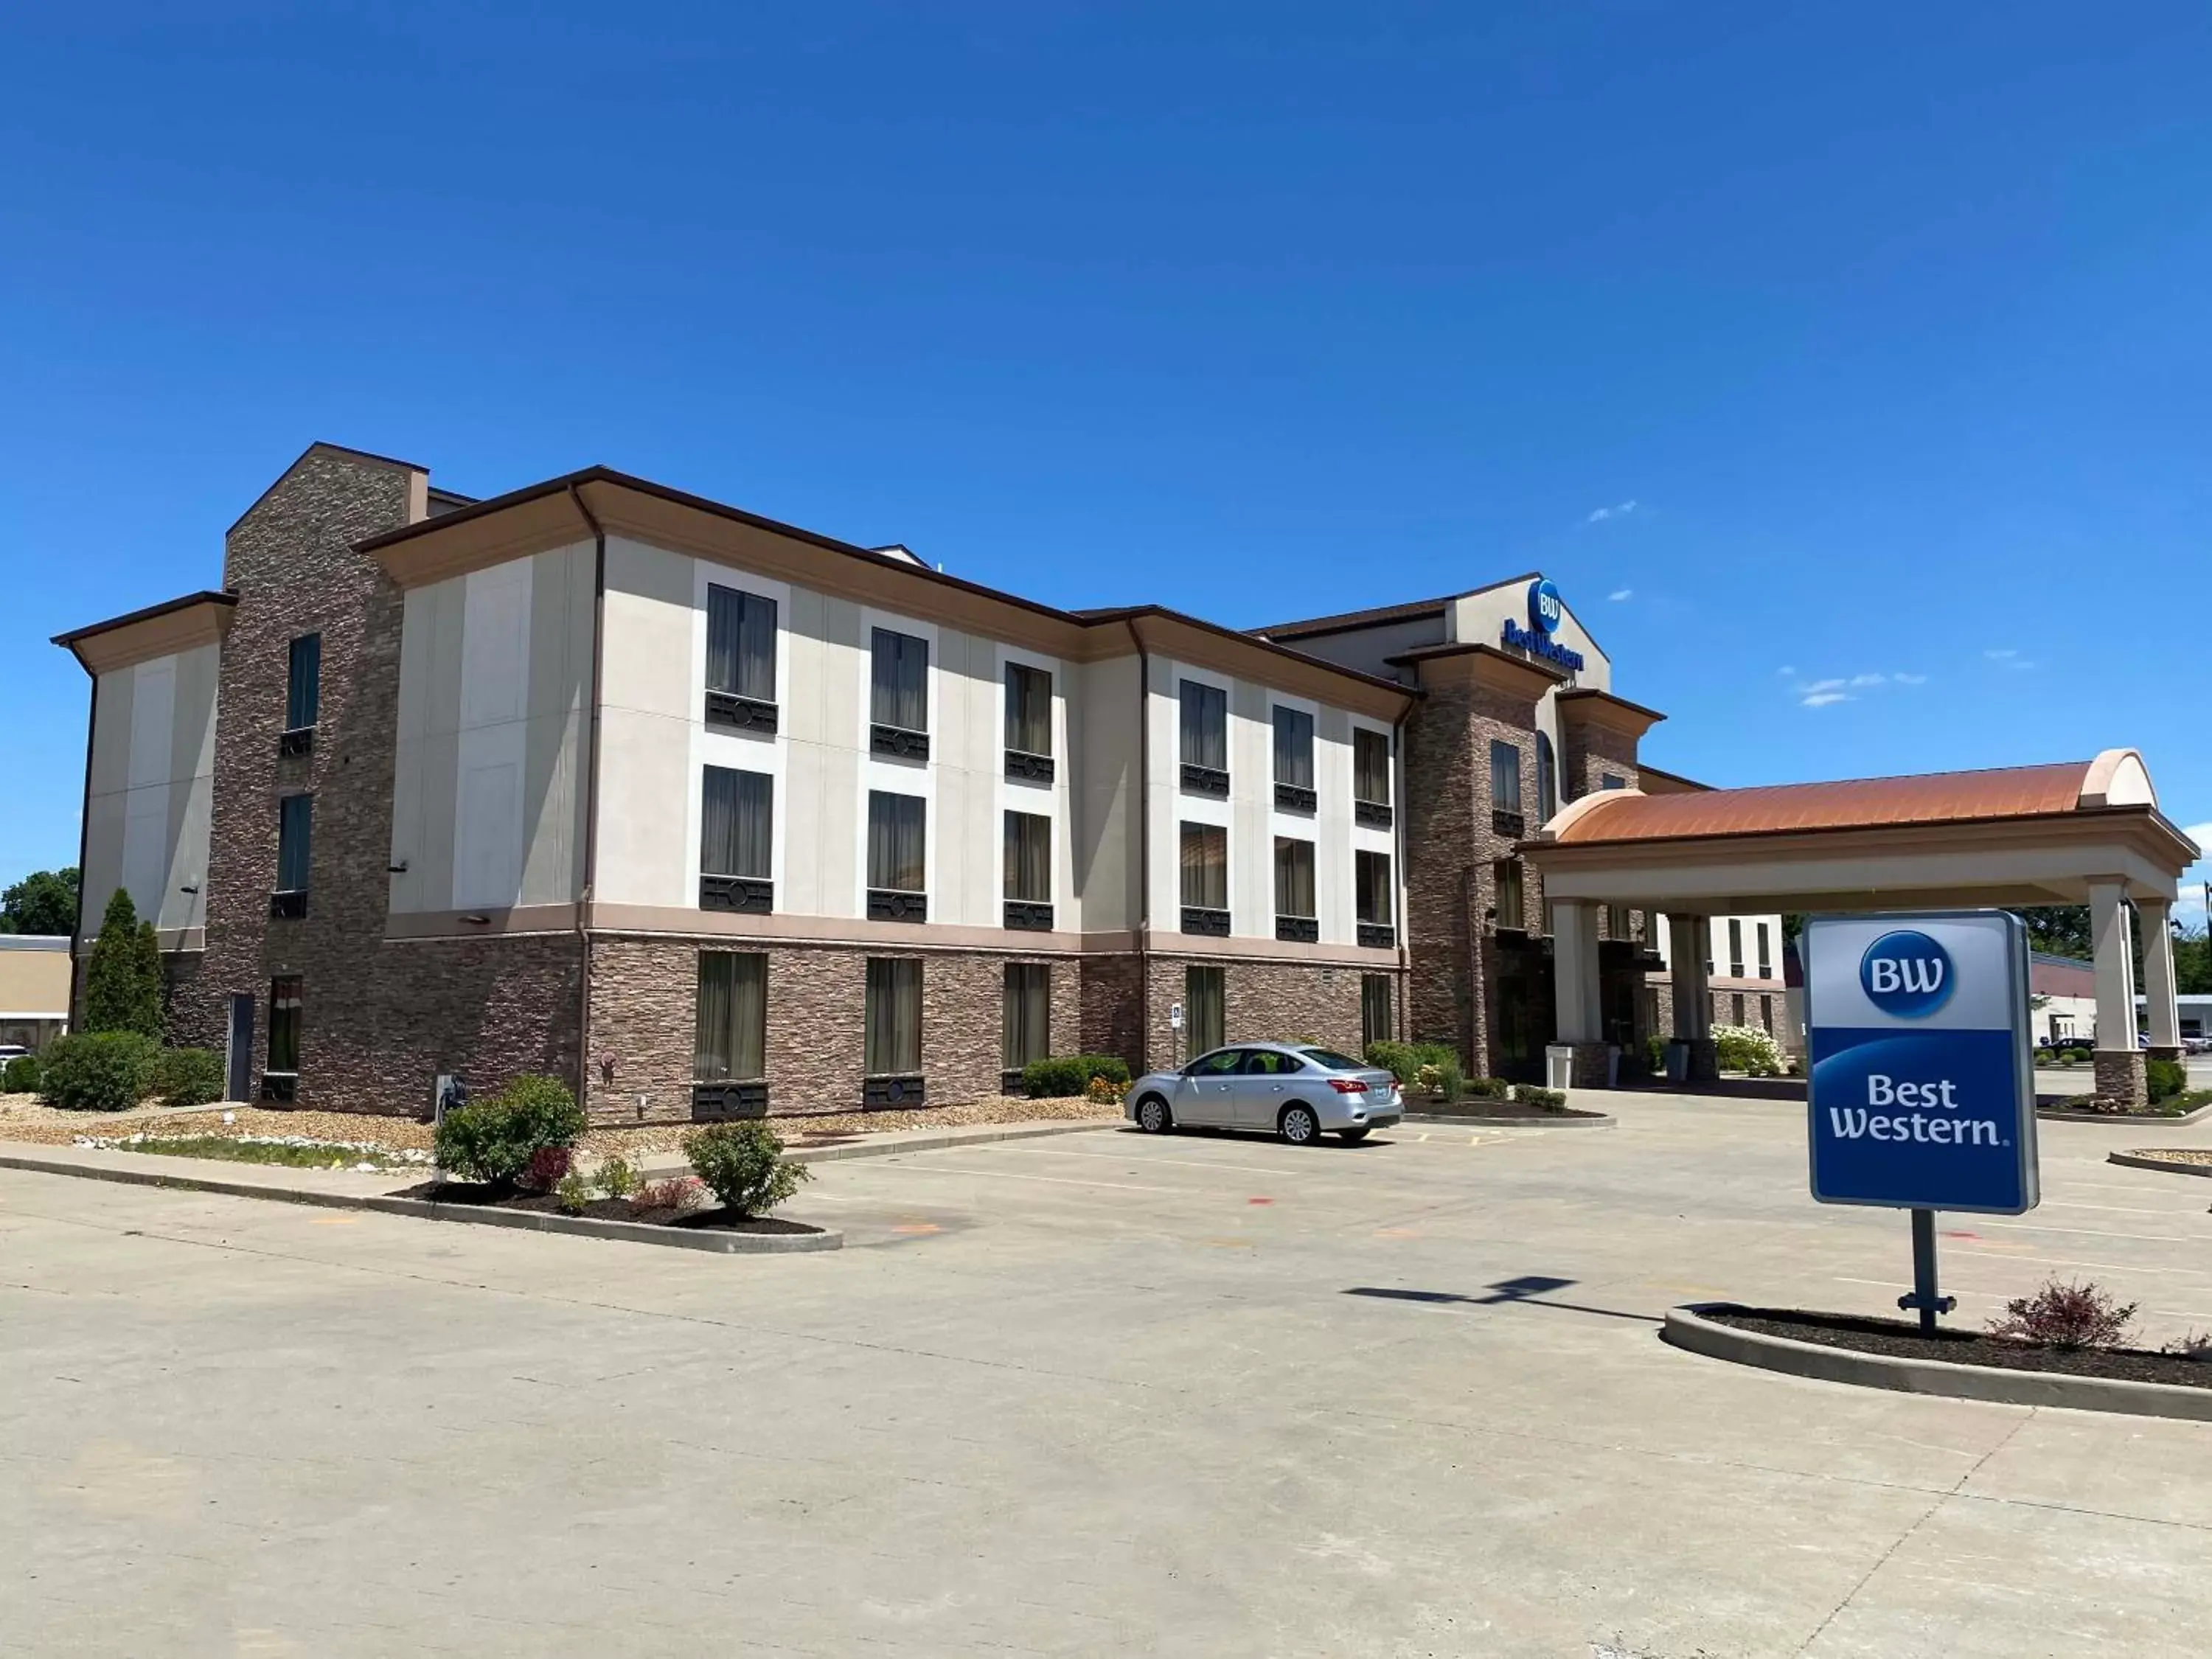 Facade/entrance, Property Building in Best Western St. Louis Airport North Hotel & Suites